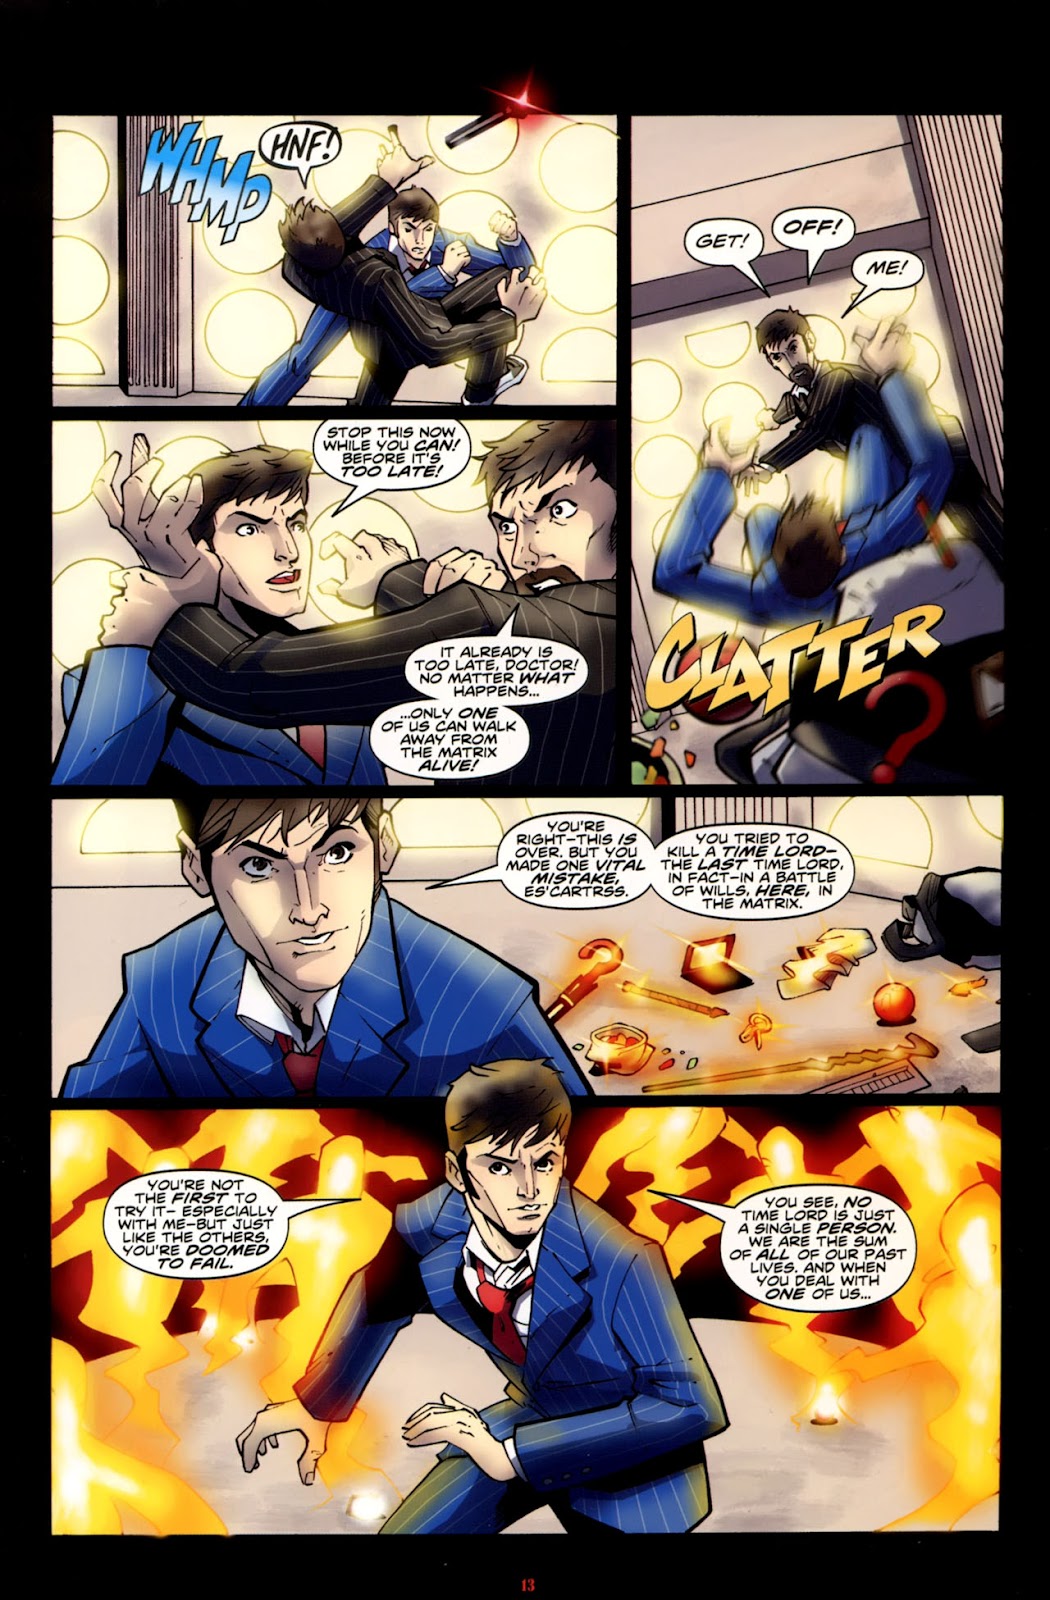 Doctor Who: The Forgotten issue 6 - Page 15